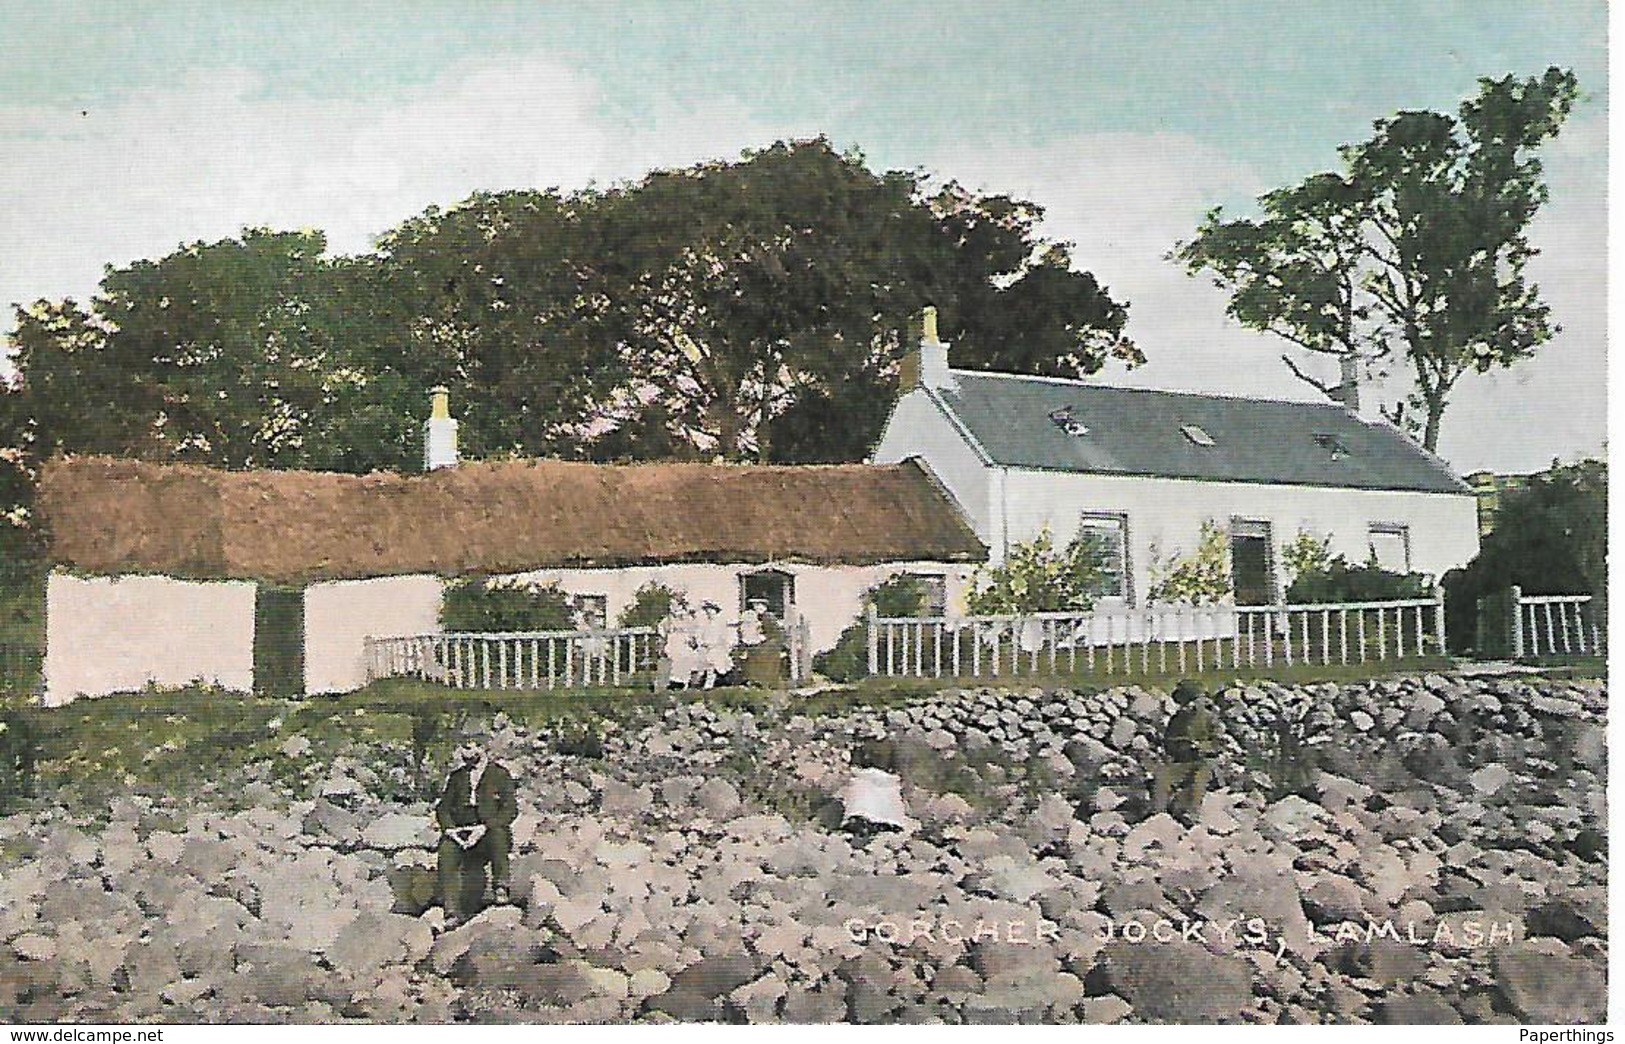 Old Colour Postcard, Scotland, Isle Of Arran, Firth Of Clyde, Gorcher Jocky's, Lamlash. Houses, Cottages, Scenery. - Bute